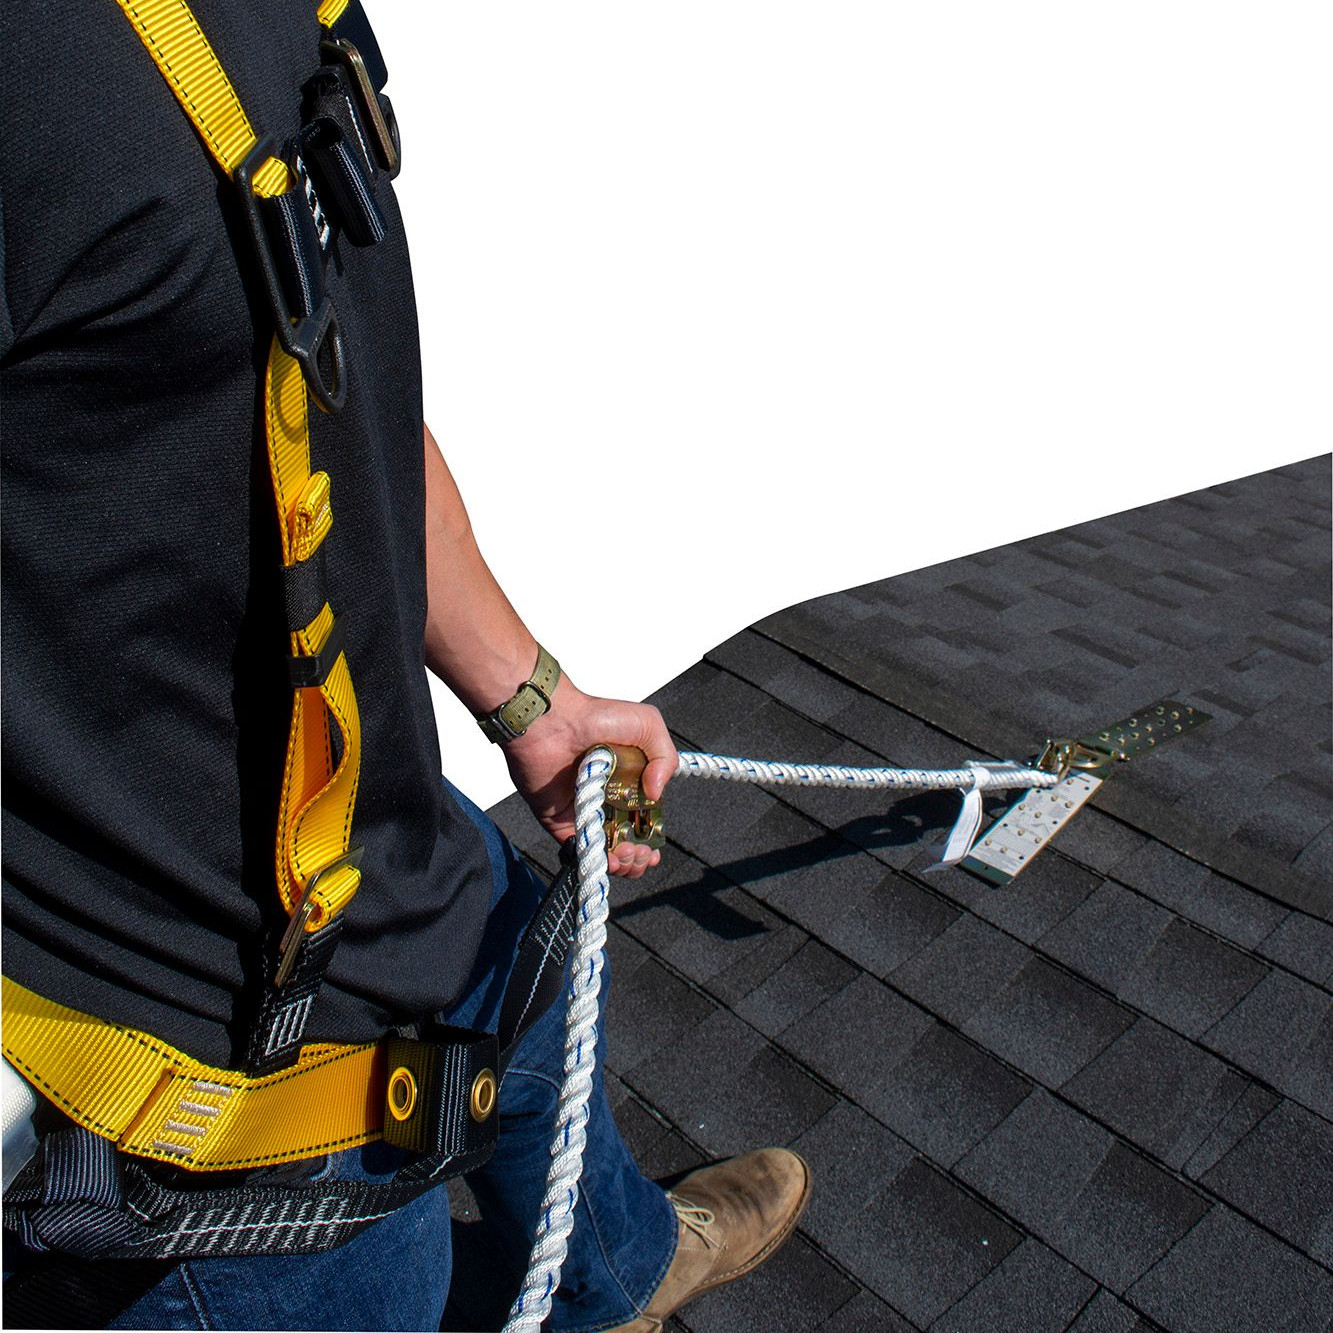 HydroShield Premium Fall Protection Harness and Lifeline In Use on Rooftop